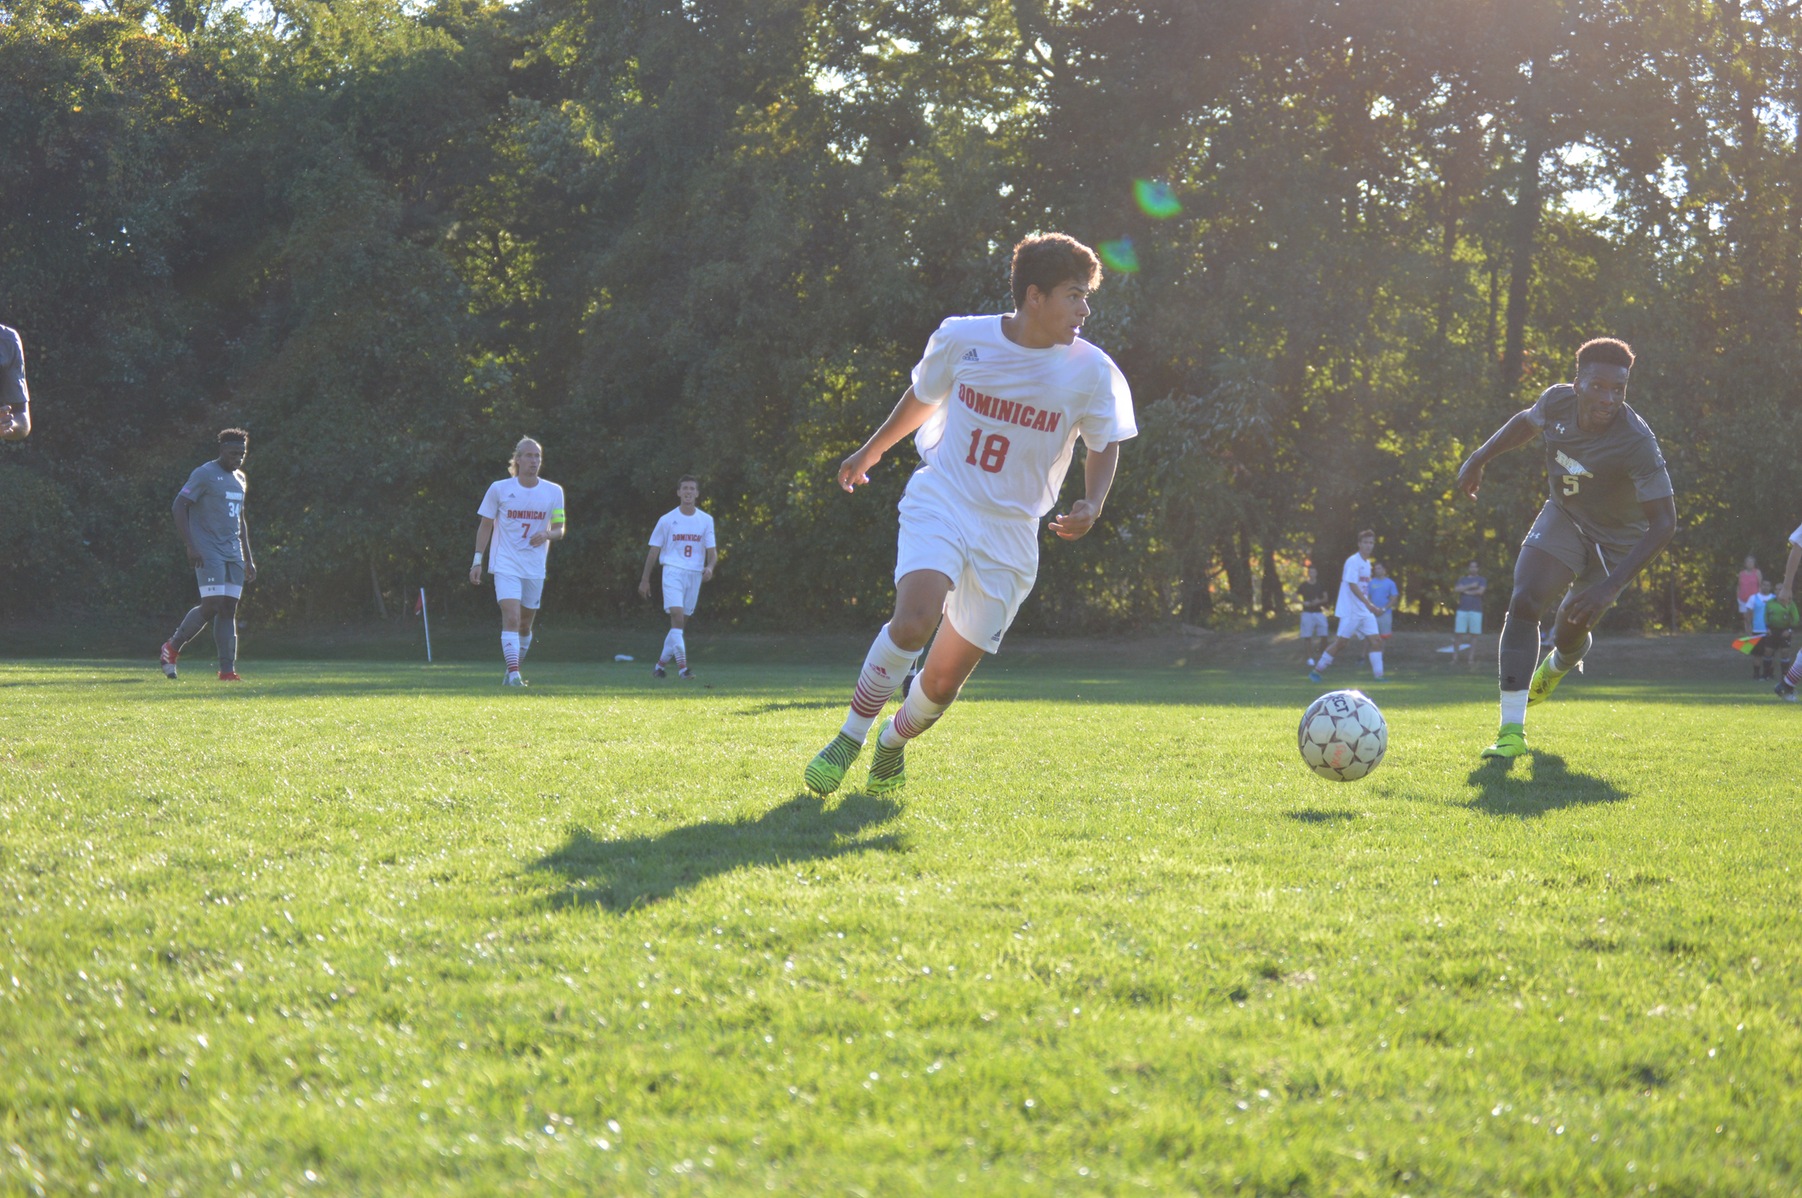 MEN'S SOCCER EDGED BY GOLDEN KNIGHTS